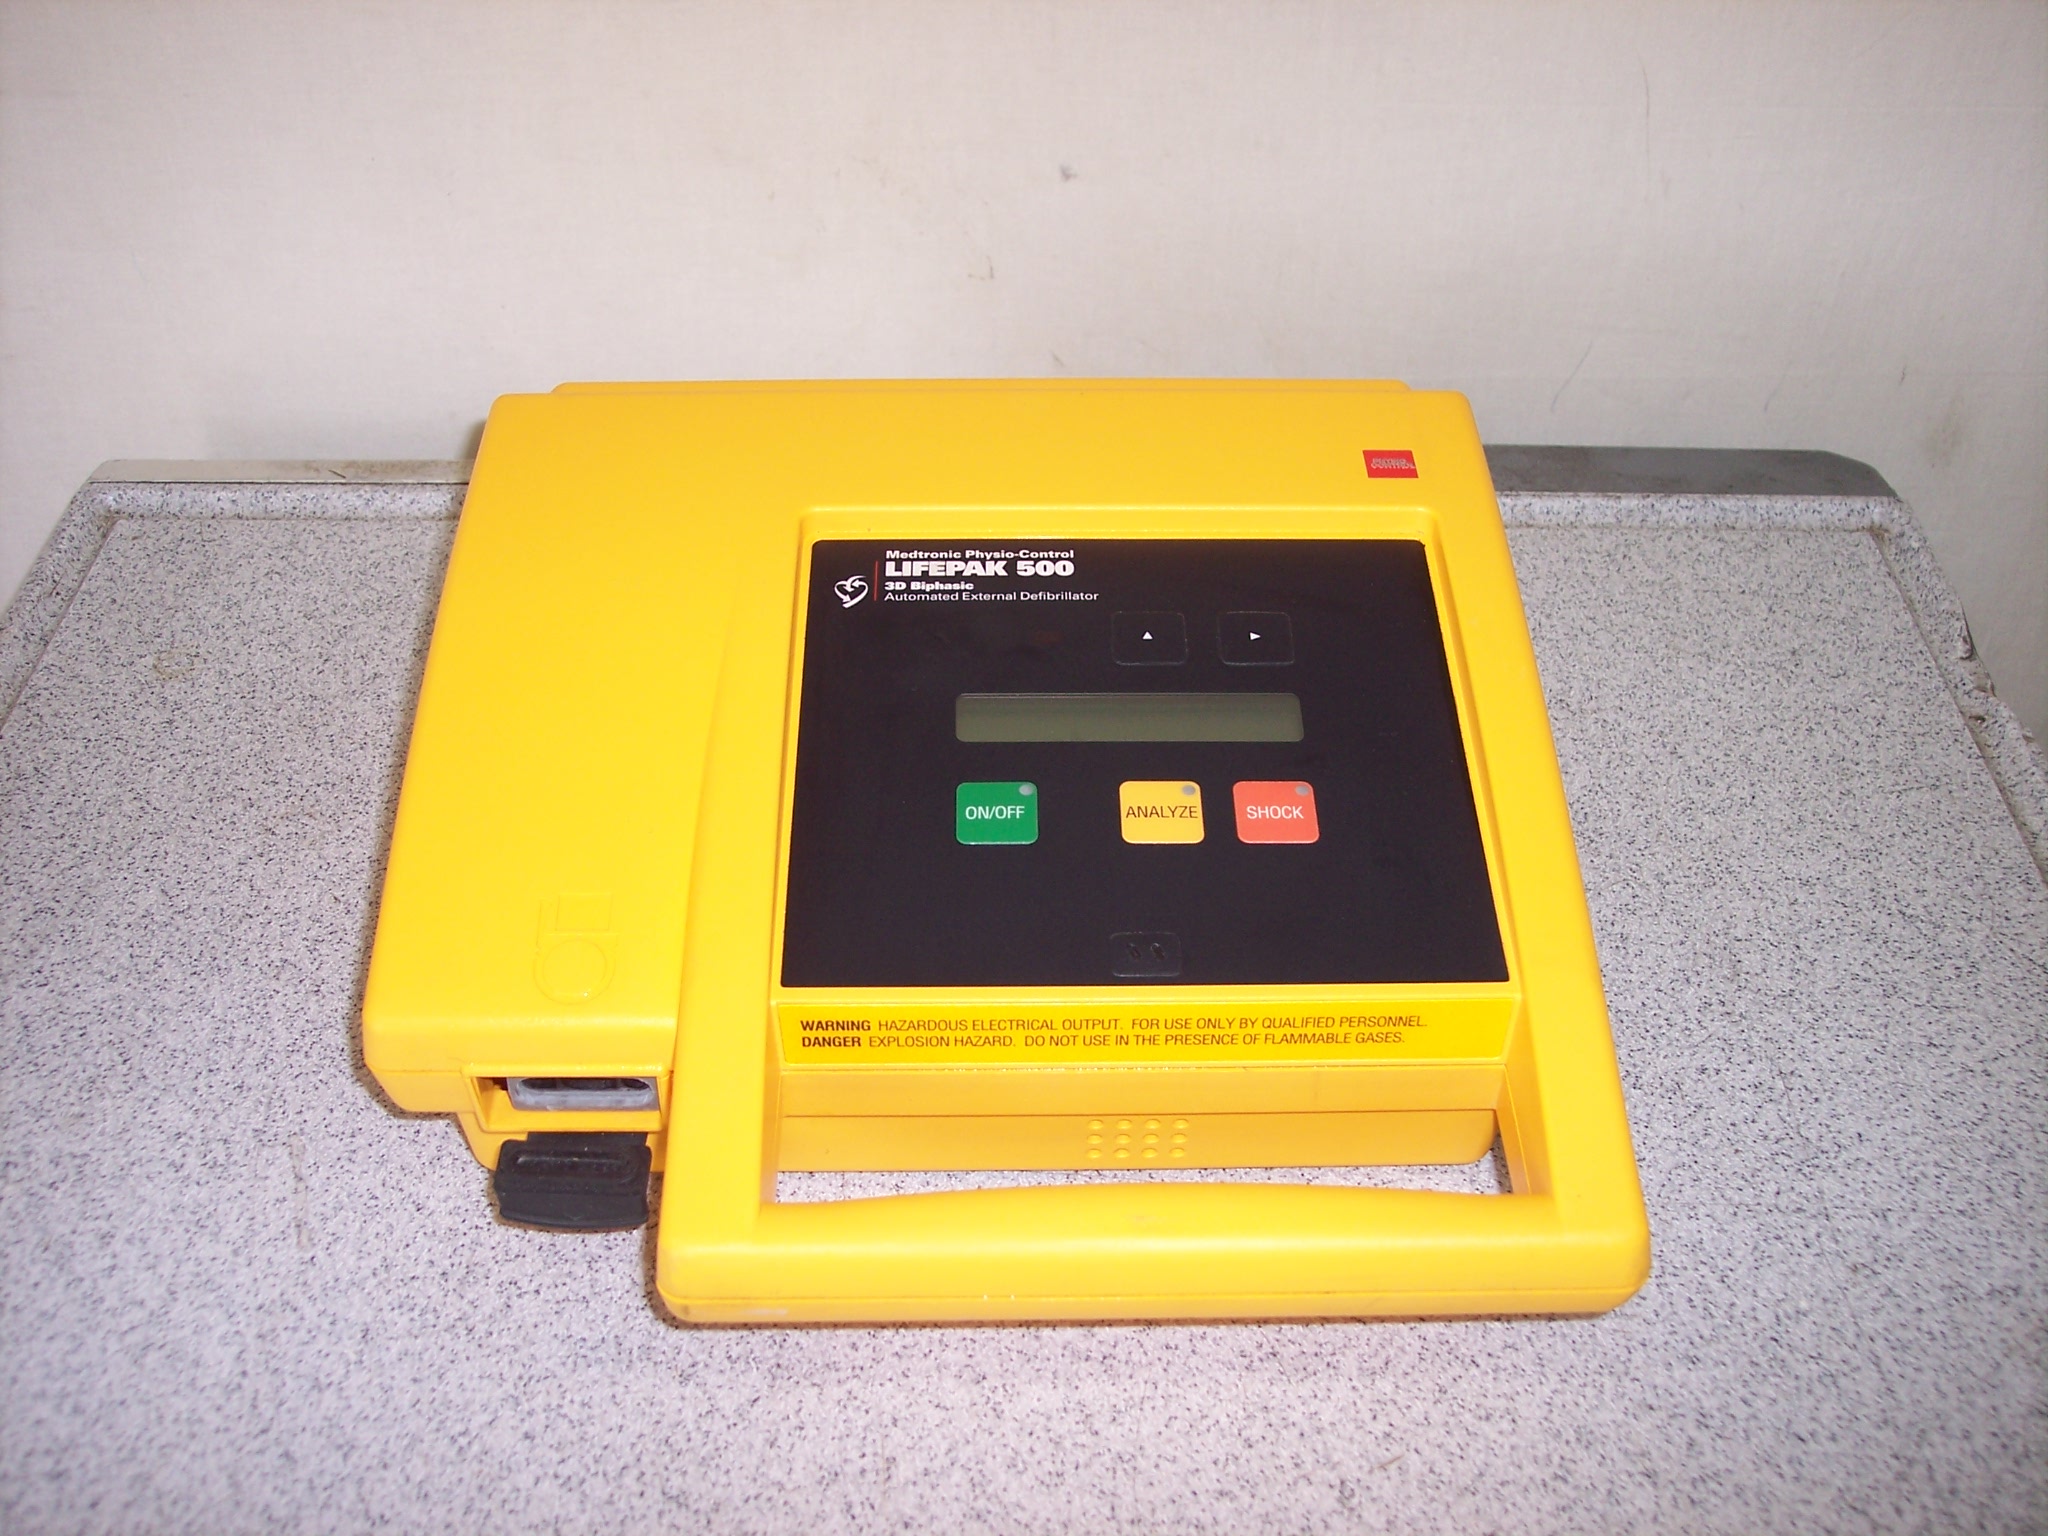 Medtronic Physio Control Lifepak 500 3D Biphasic AED  Automated External Defibrillator  